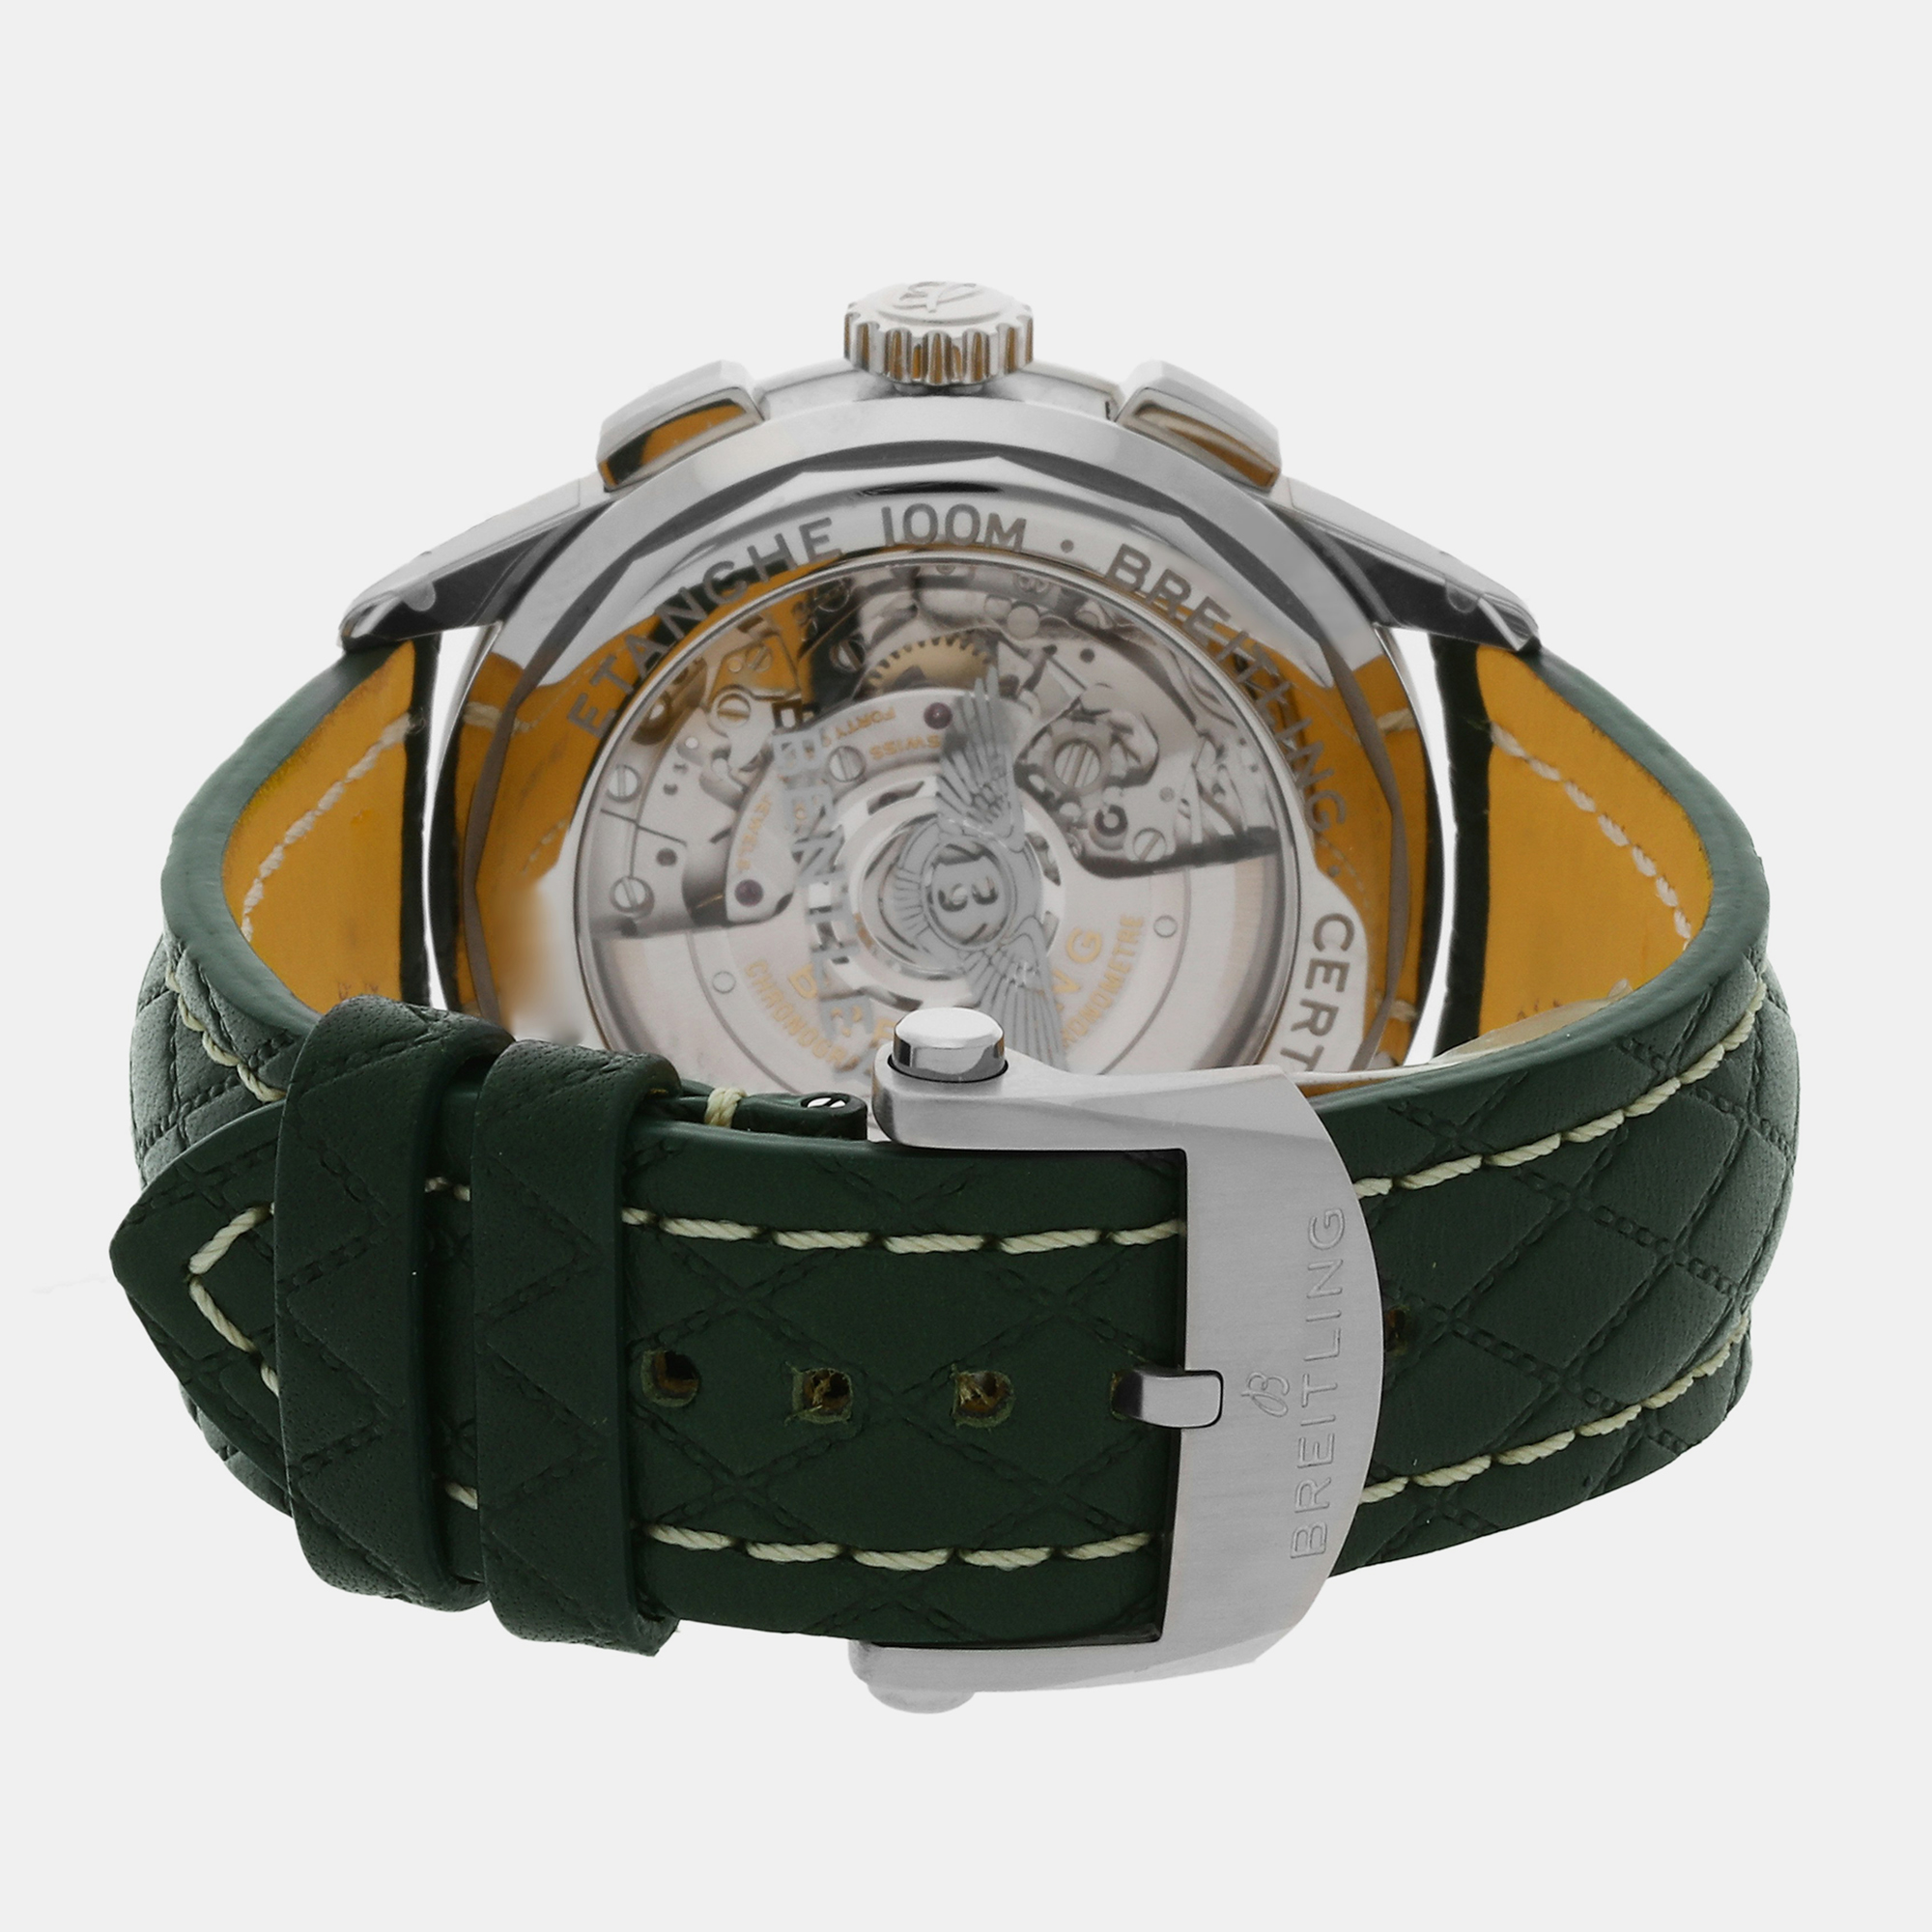 Breitling Green Stainless Steel Premier AB0118A11L1X1 Automatic Men's Wristwatch 42 Mm